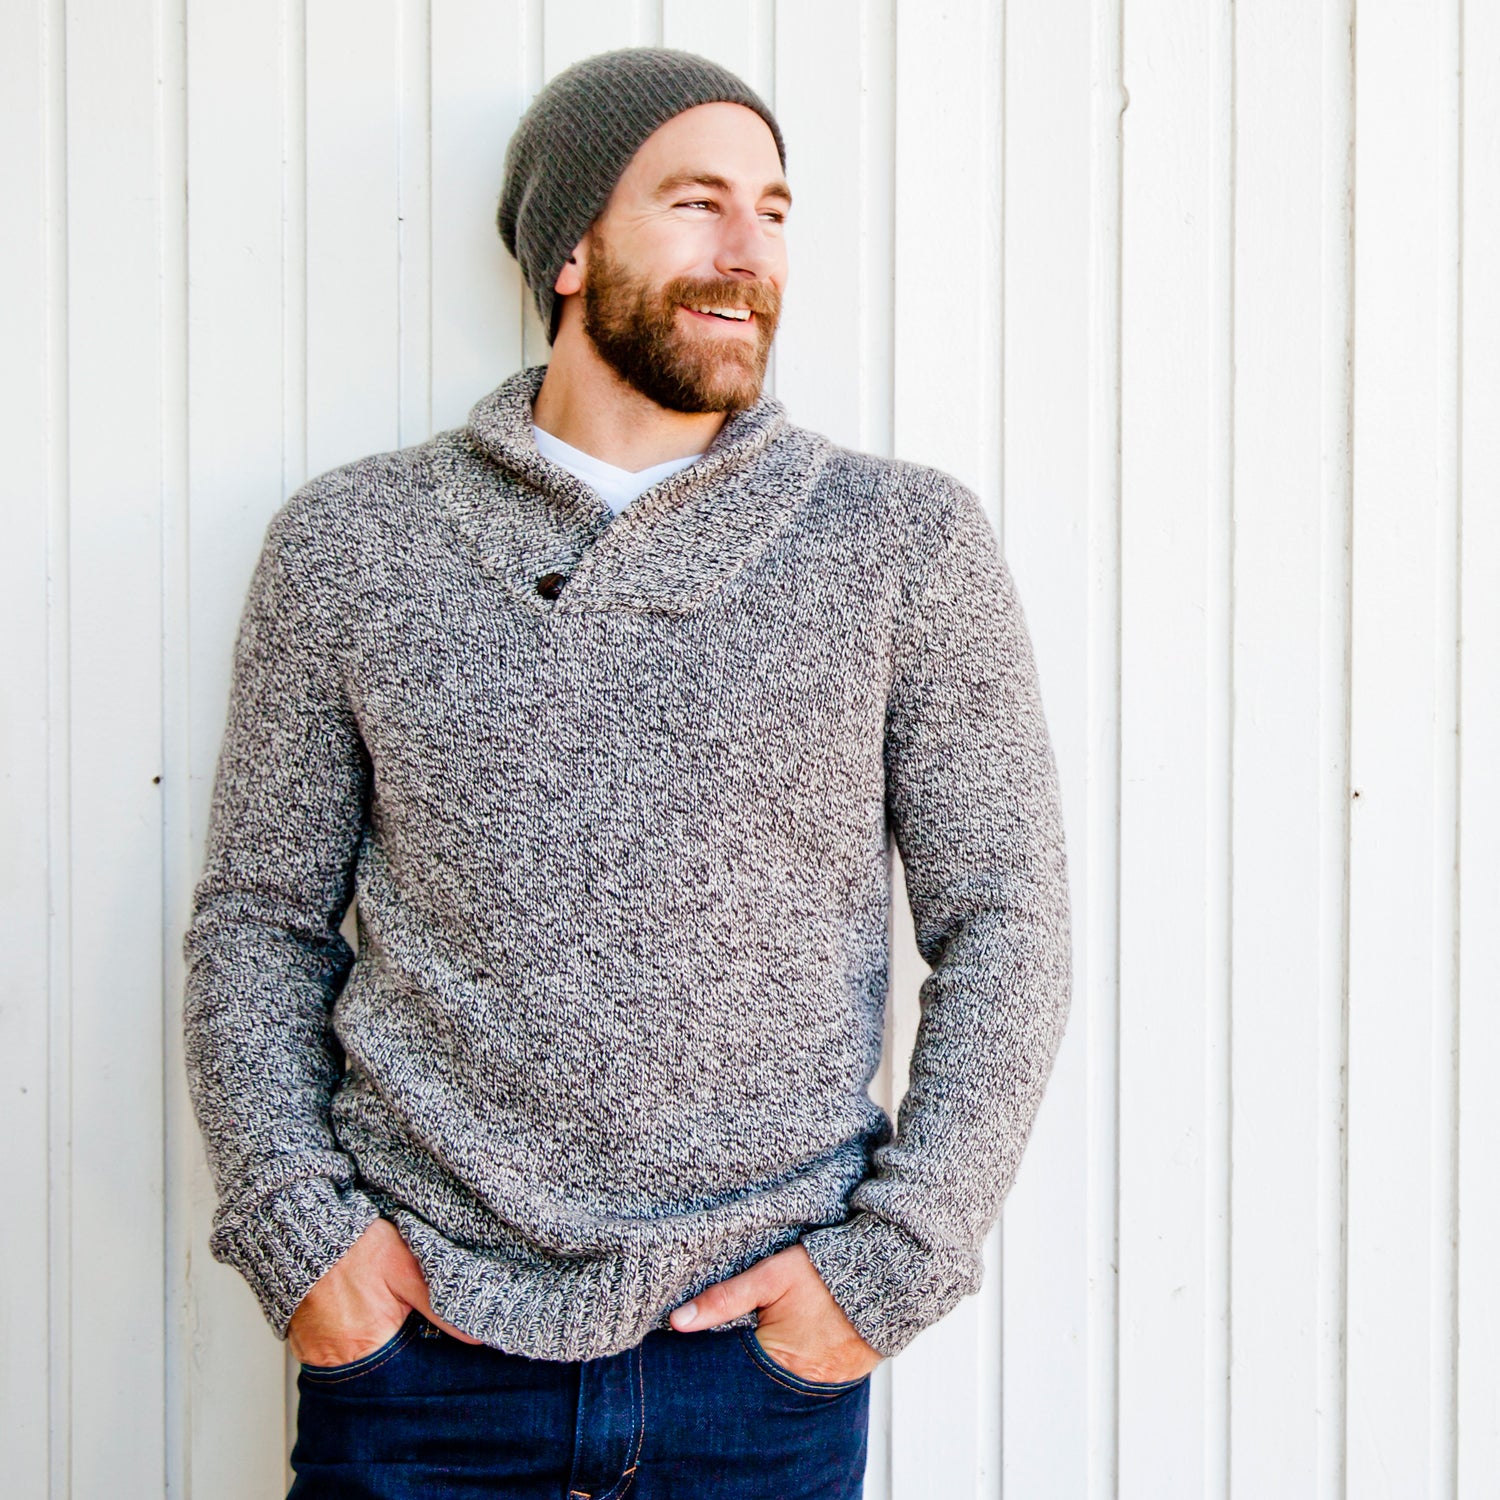 The Best Budget Sweaters for Men